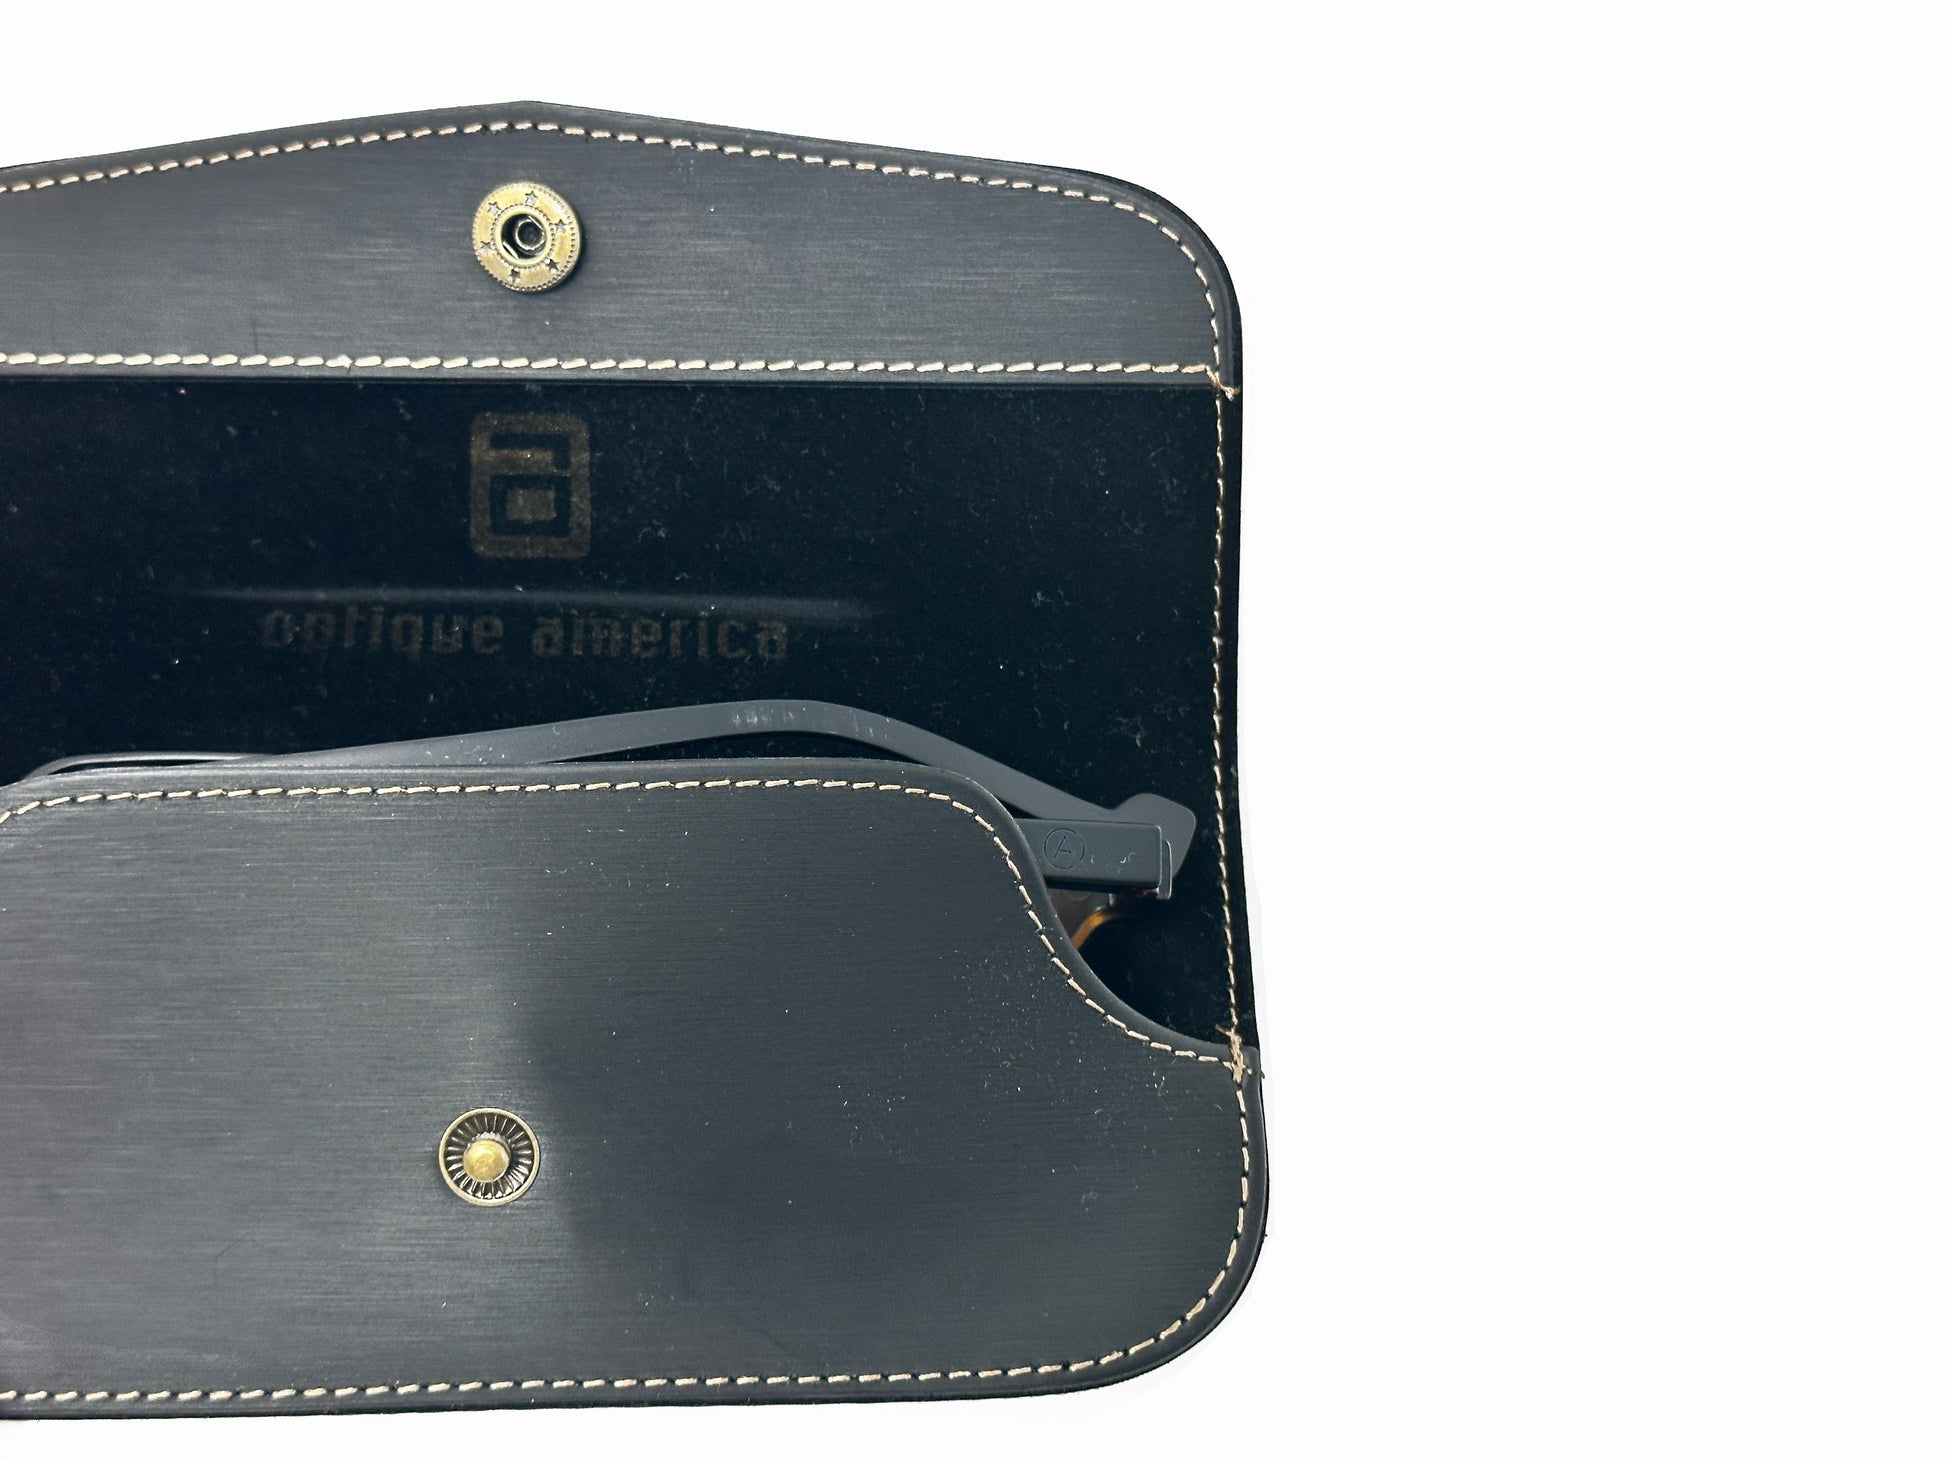 Inside of black leather snap case with Optique America logo